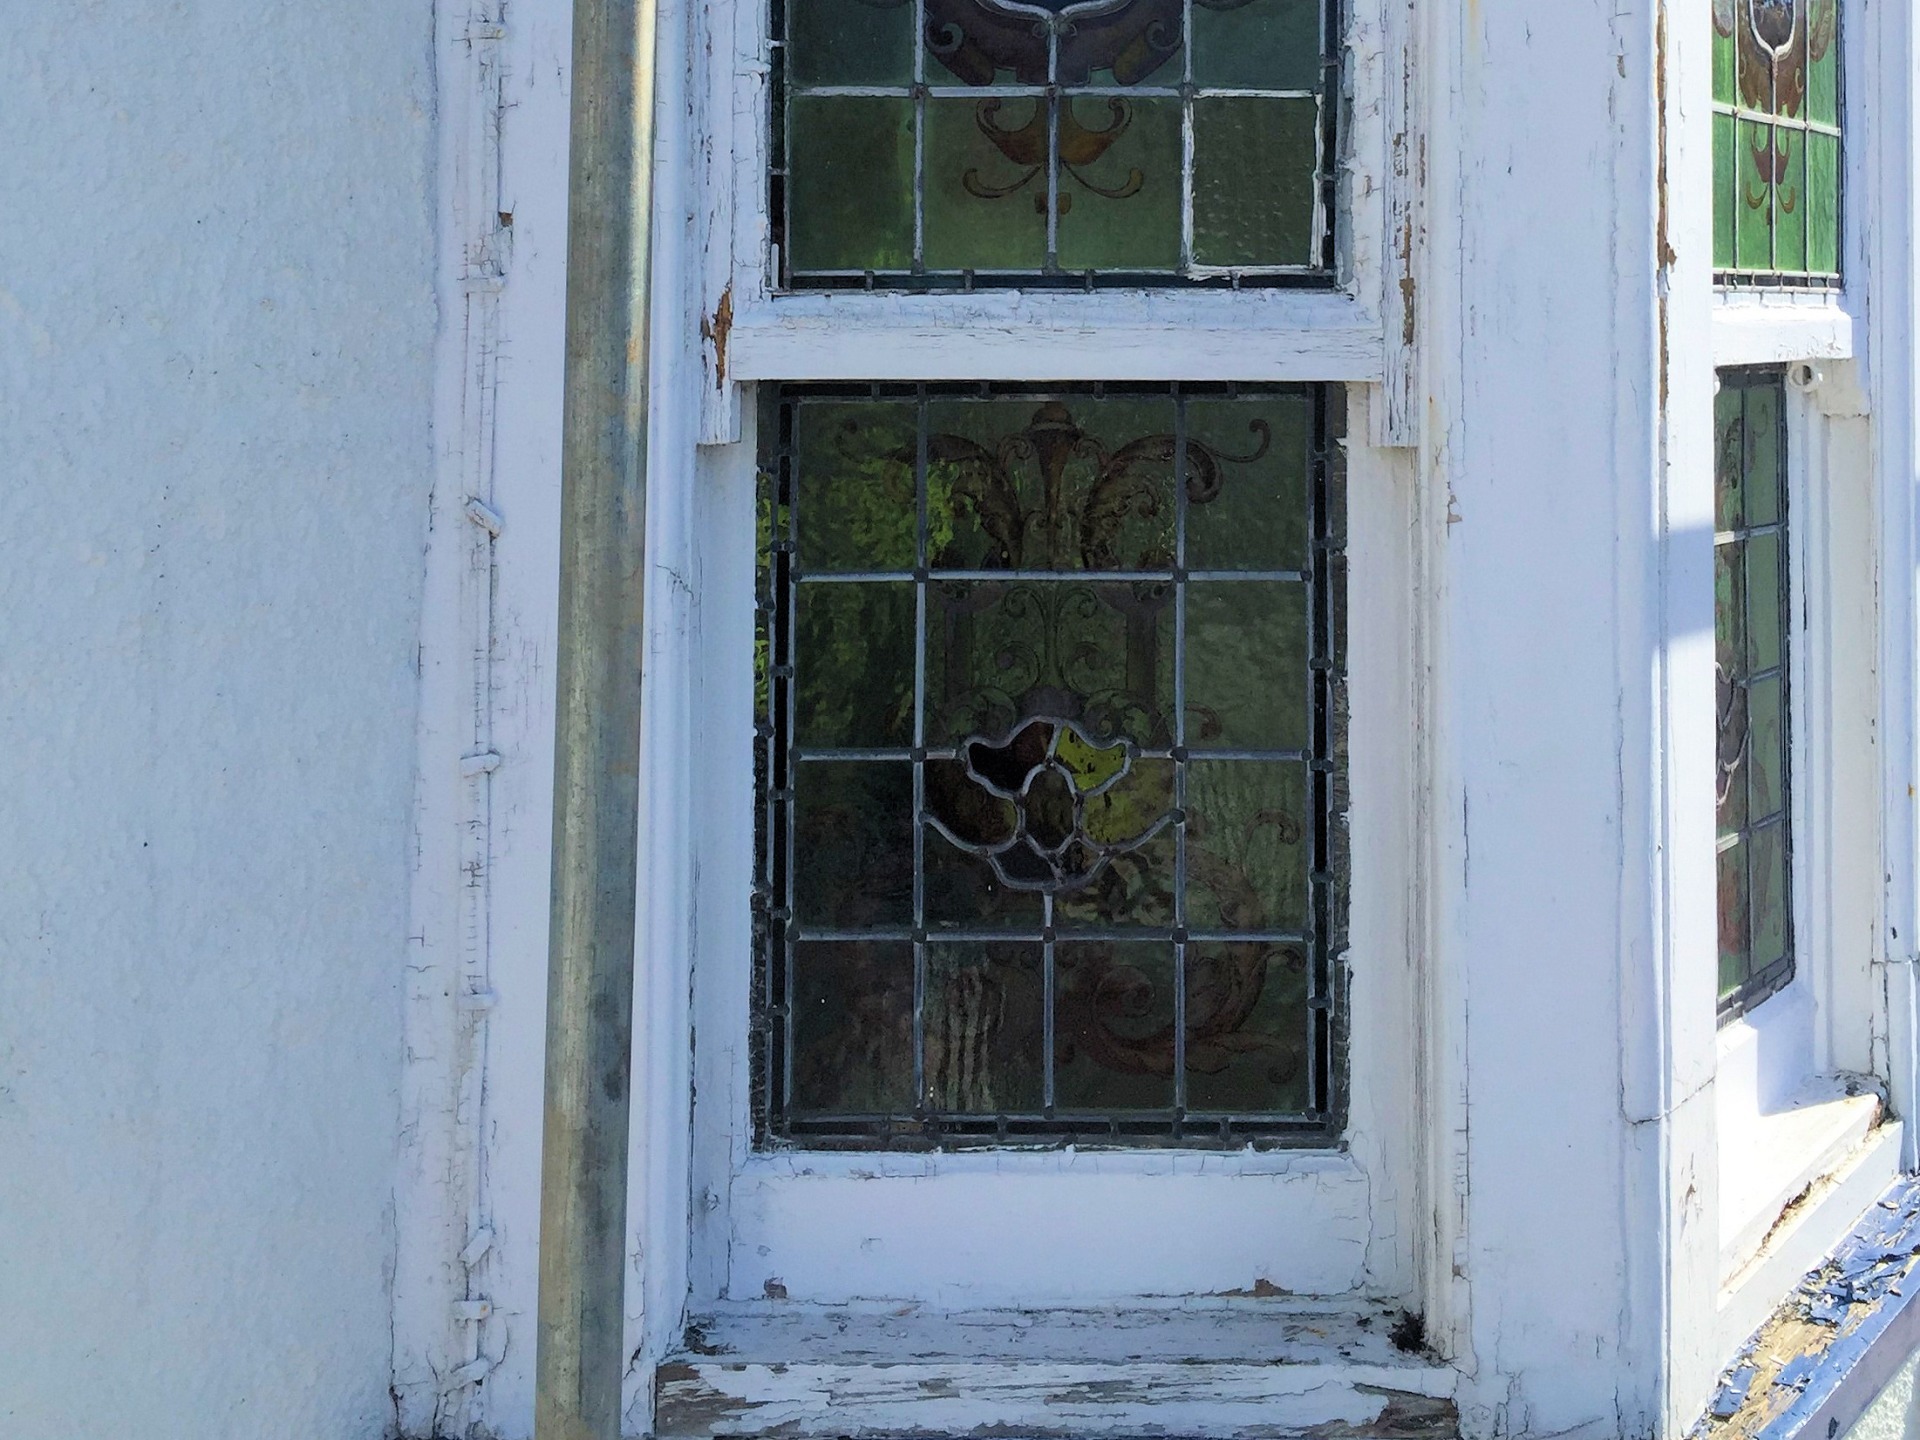 Original rotten timber supporting bay window to be removed and replaced with timber. Barnstaple North Devon